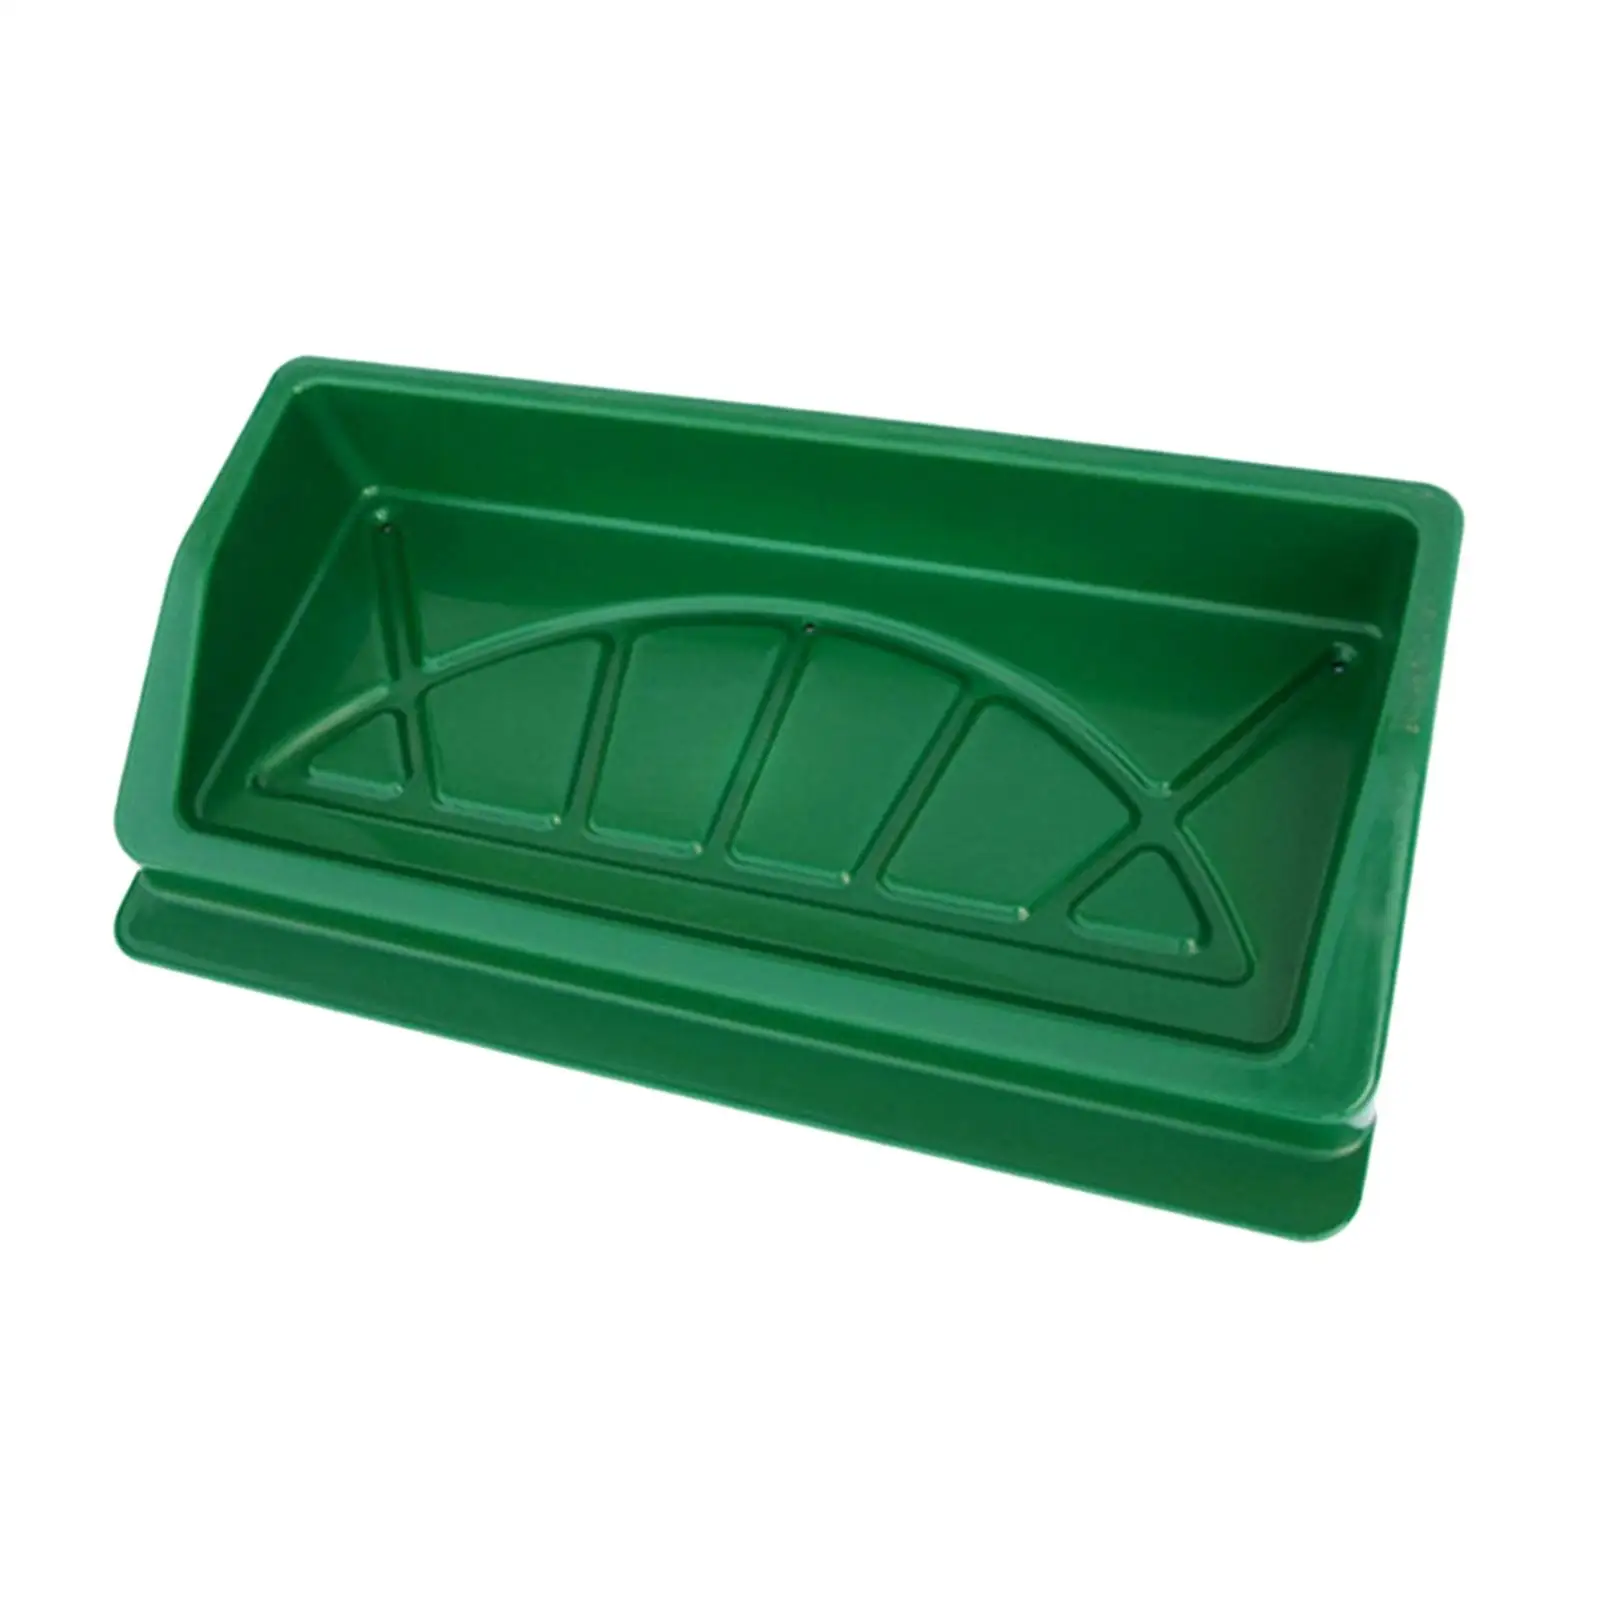 Golf Ball Tray Durable Golf Practice Accessory with Drainage Holes Golf Gear